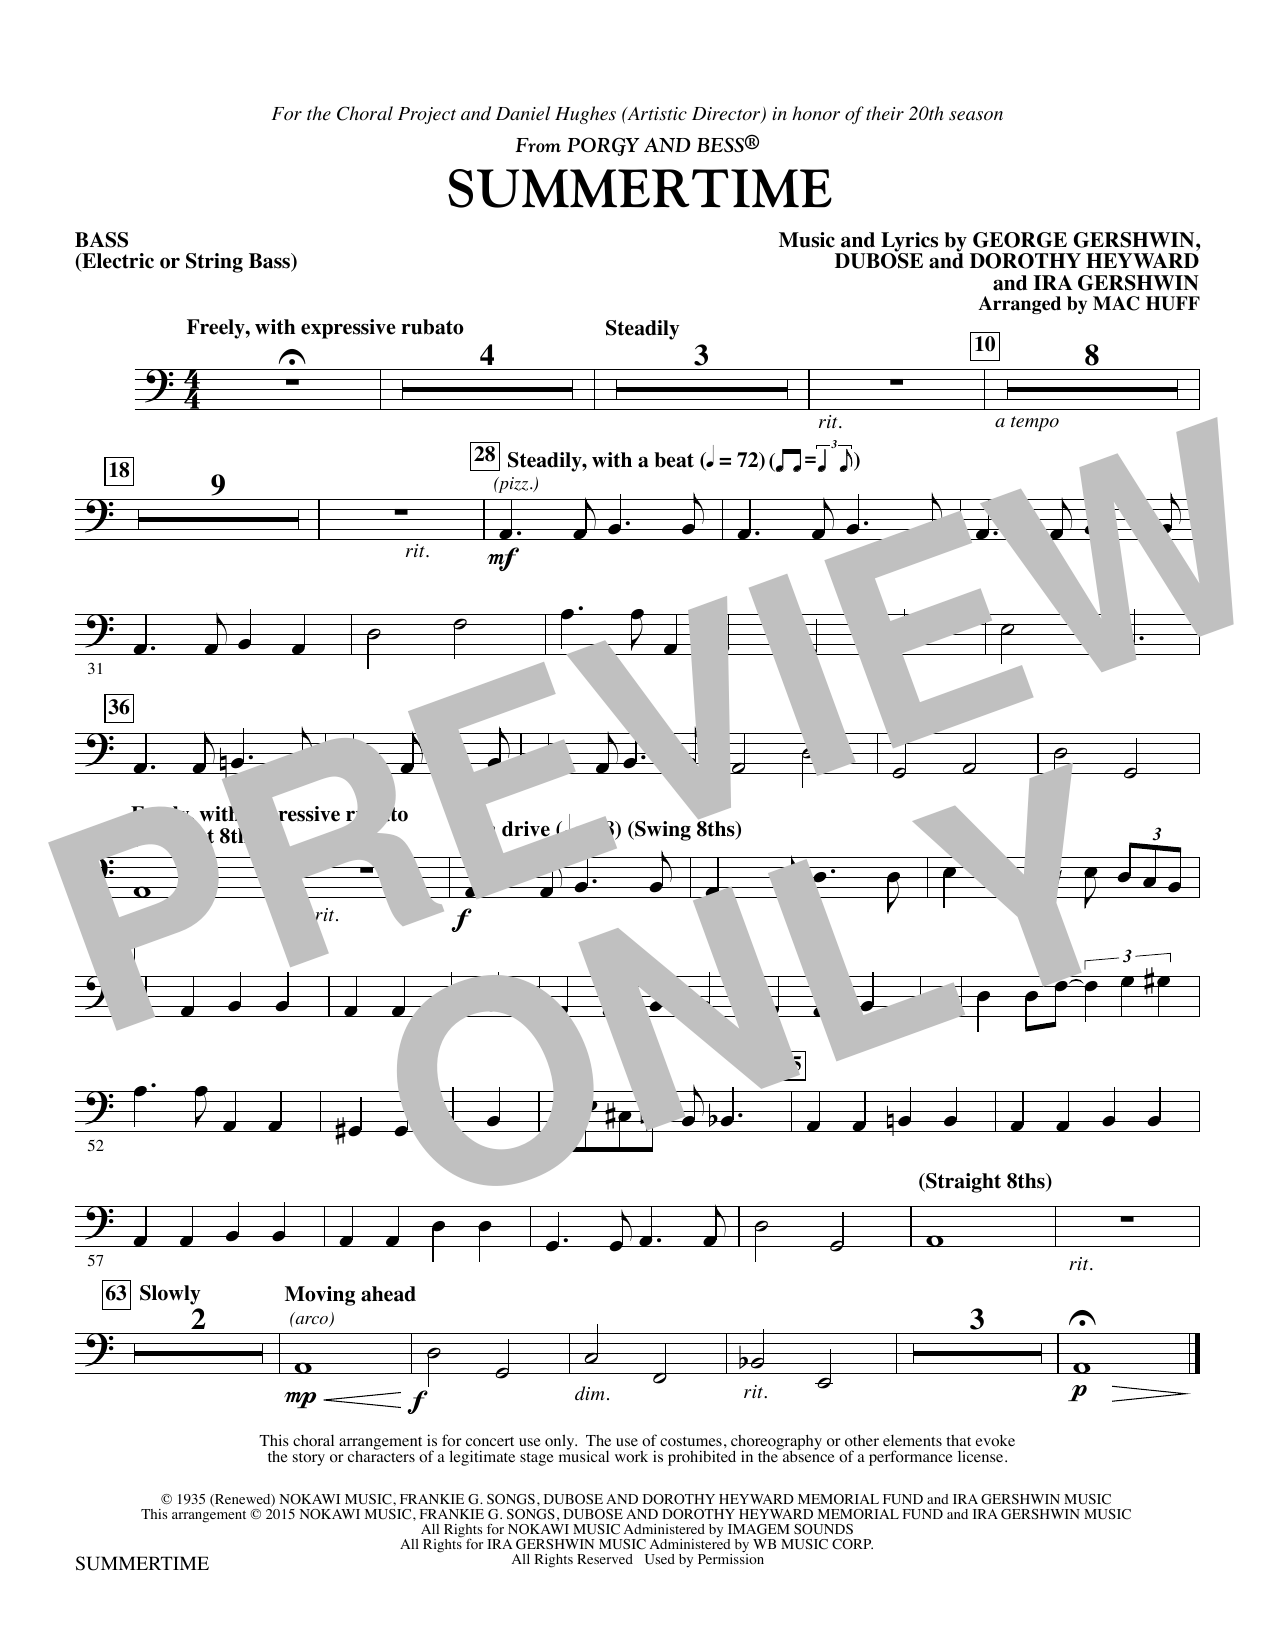 George Gershwin Summertime - String Bass/Electric Bass sheet music notes and chords. Download Printable PDF.